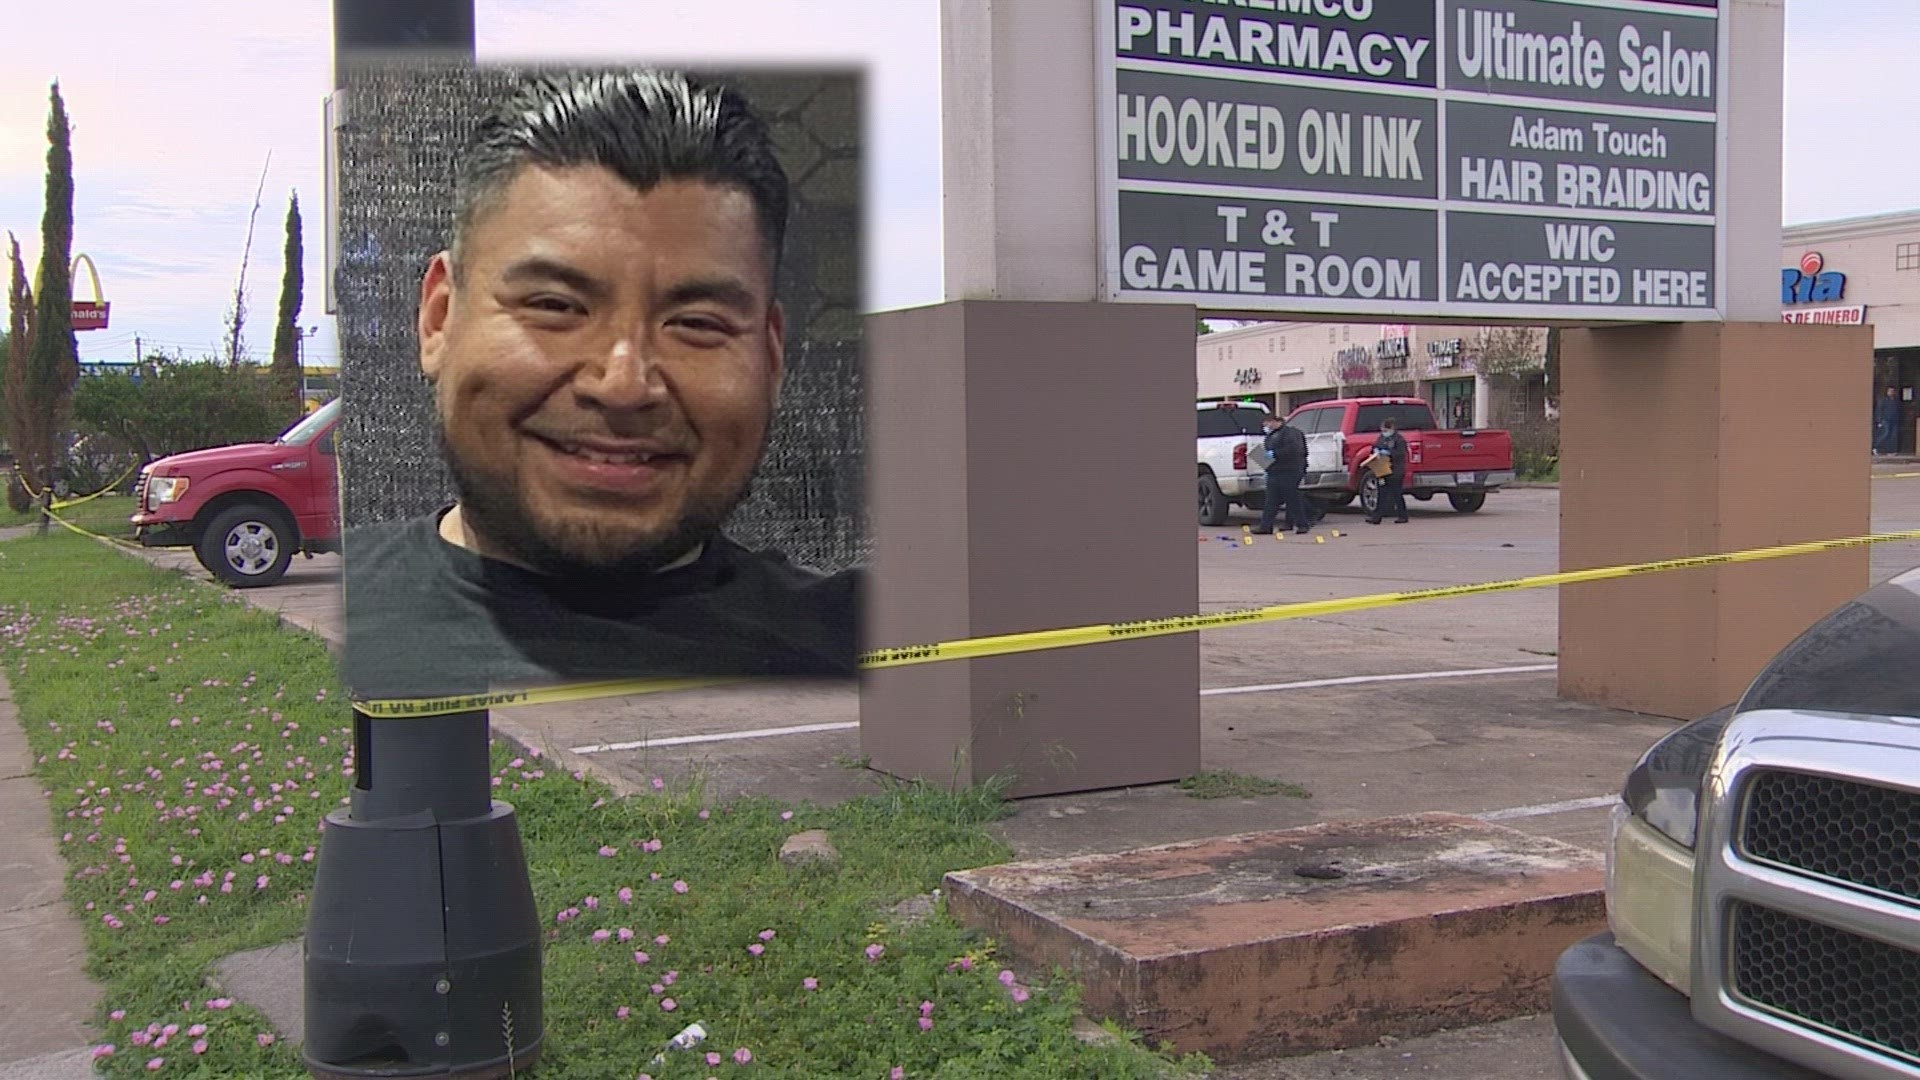 According to family members, one of the men who was killed was 29-year-old Gerardo Filomeno.